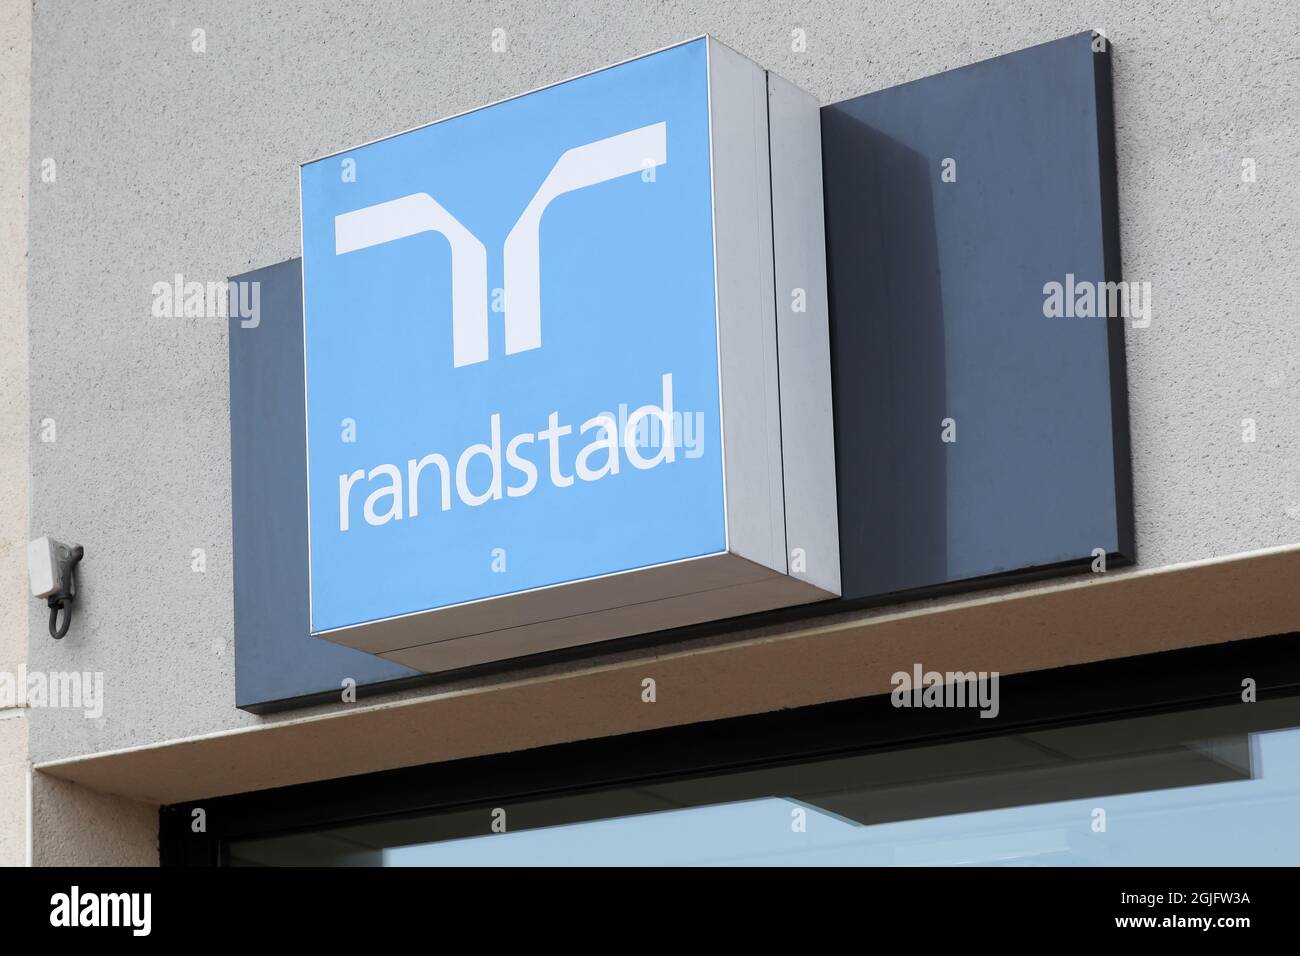 Villefranche, France - July 10, 2021: Randstad logo on a wall. Randstad is a Dutch multinational human resource consulting firm Stock Photo